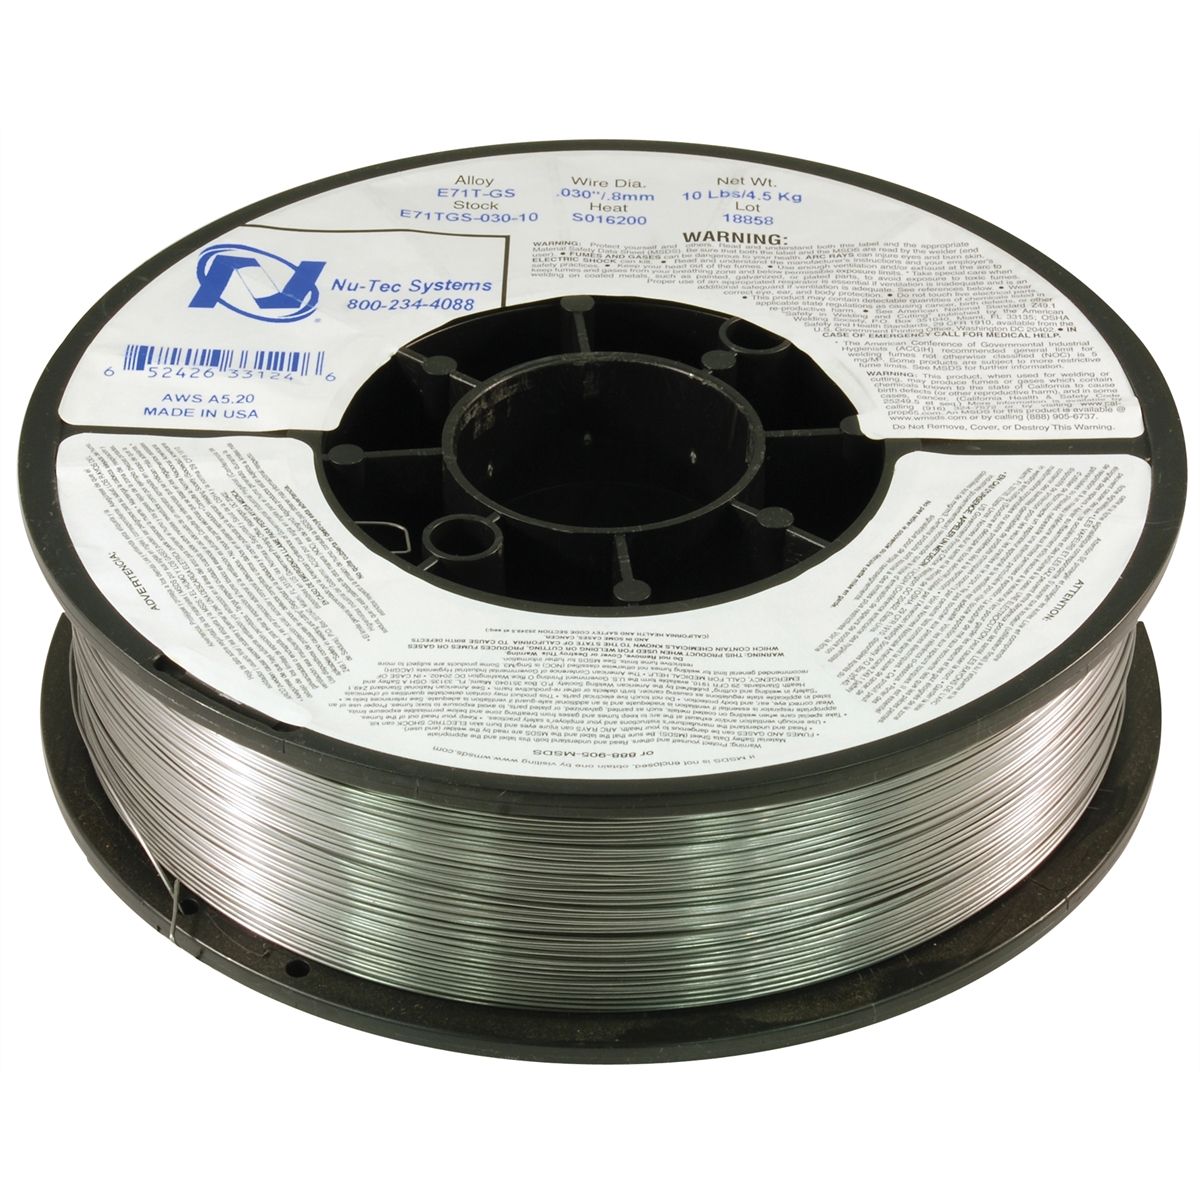 MTNWEW-6231 Industrial Products & Tools 8 Spool Billion_Store by .030 Flux-Cored E71T-GS Welding Wire